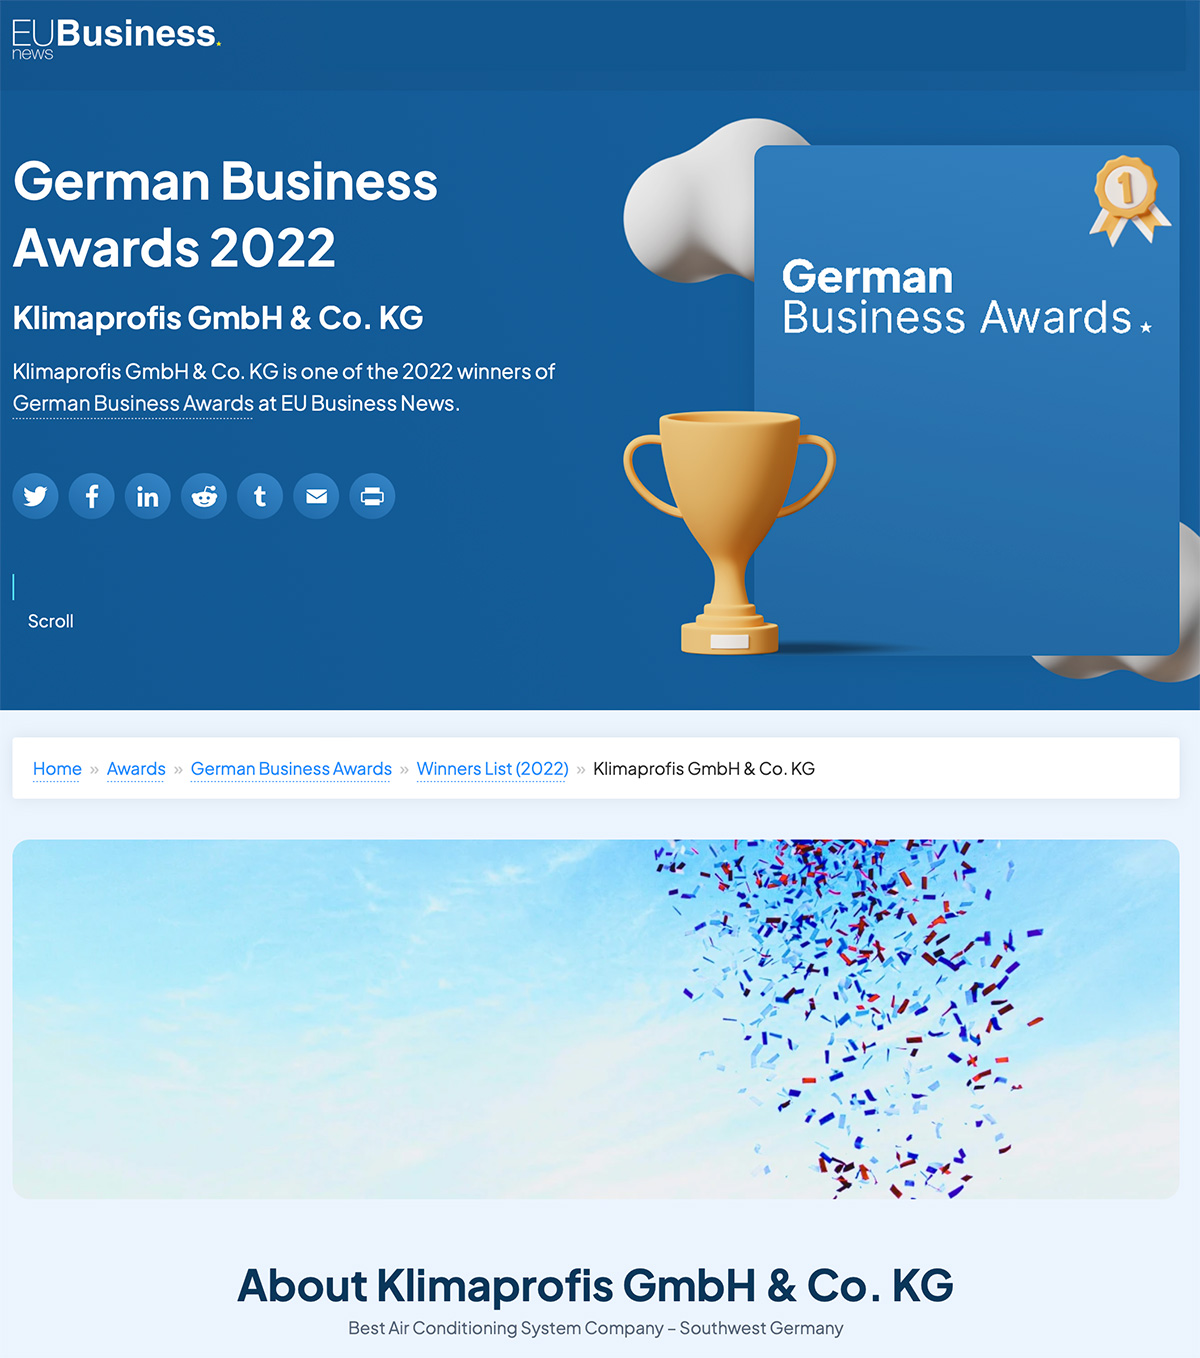 Klimaprofis GmbH & Co. KG is one of the 2022 winners of German Business Awards at EU Business News.